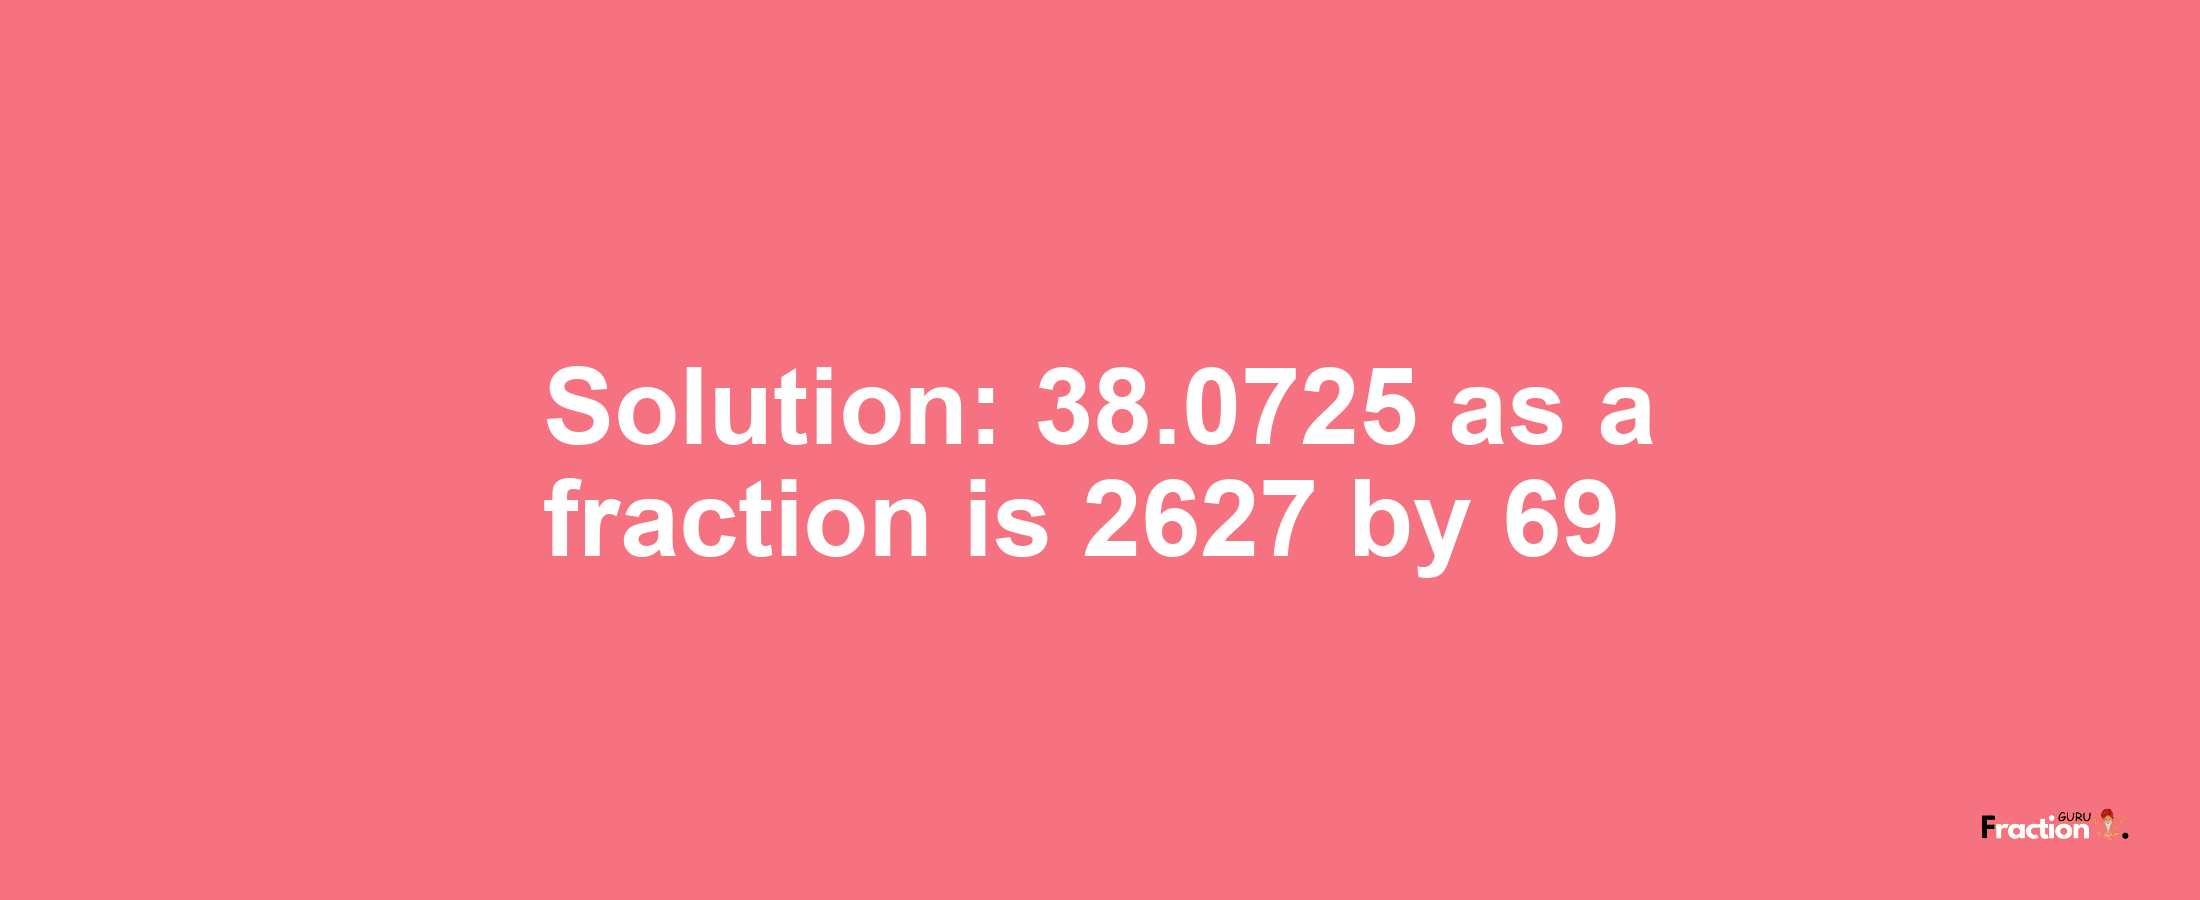 Solution:38.0725 as a fraction is 2627/69